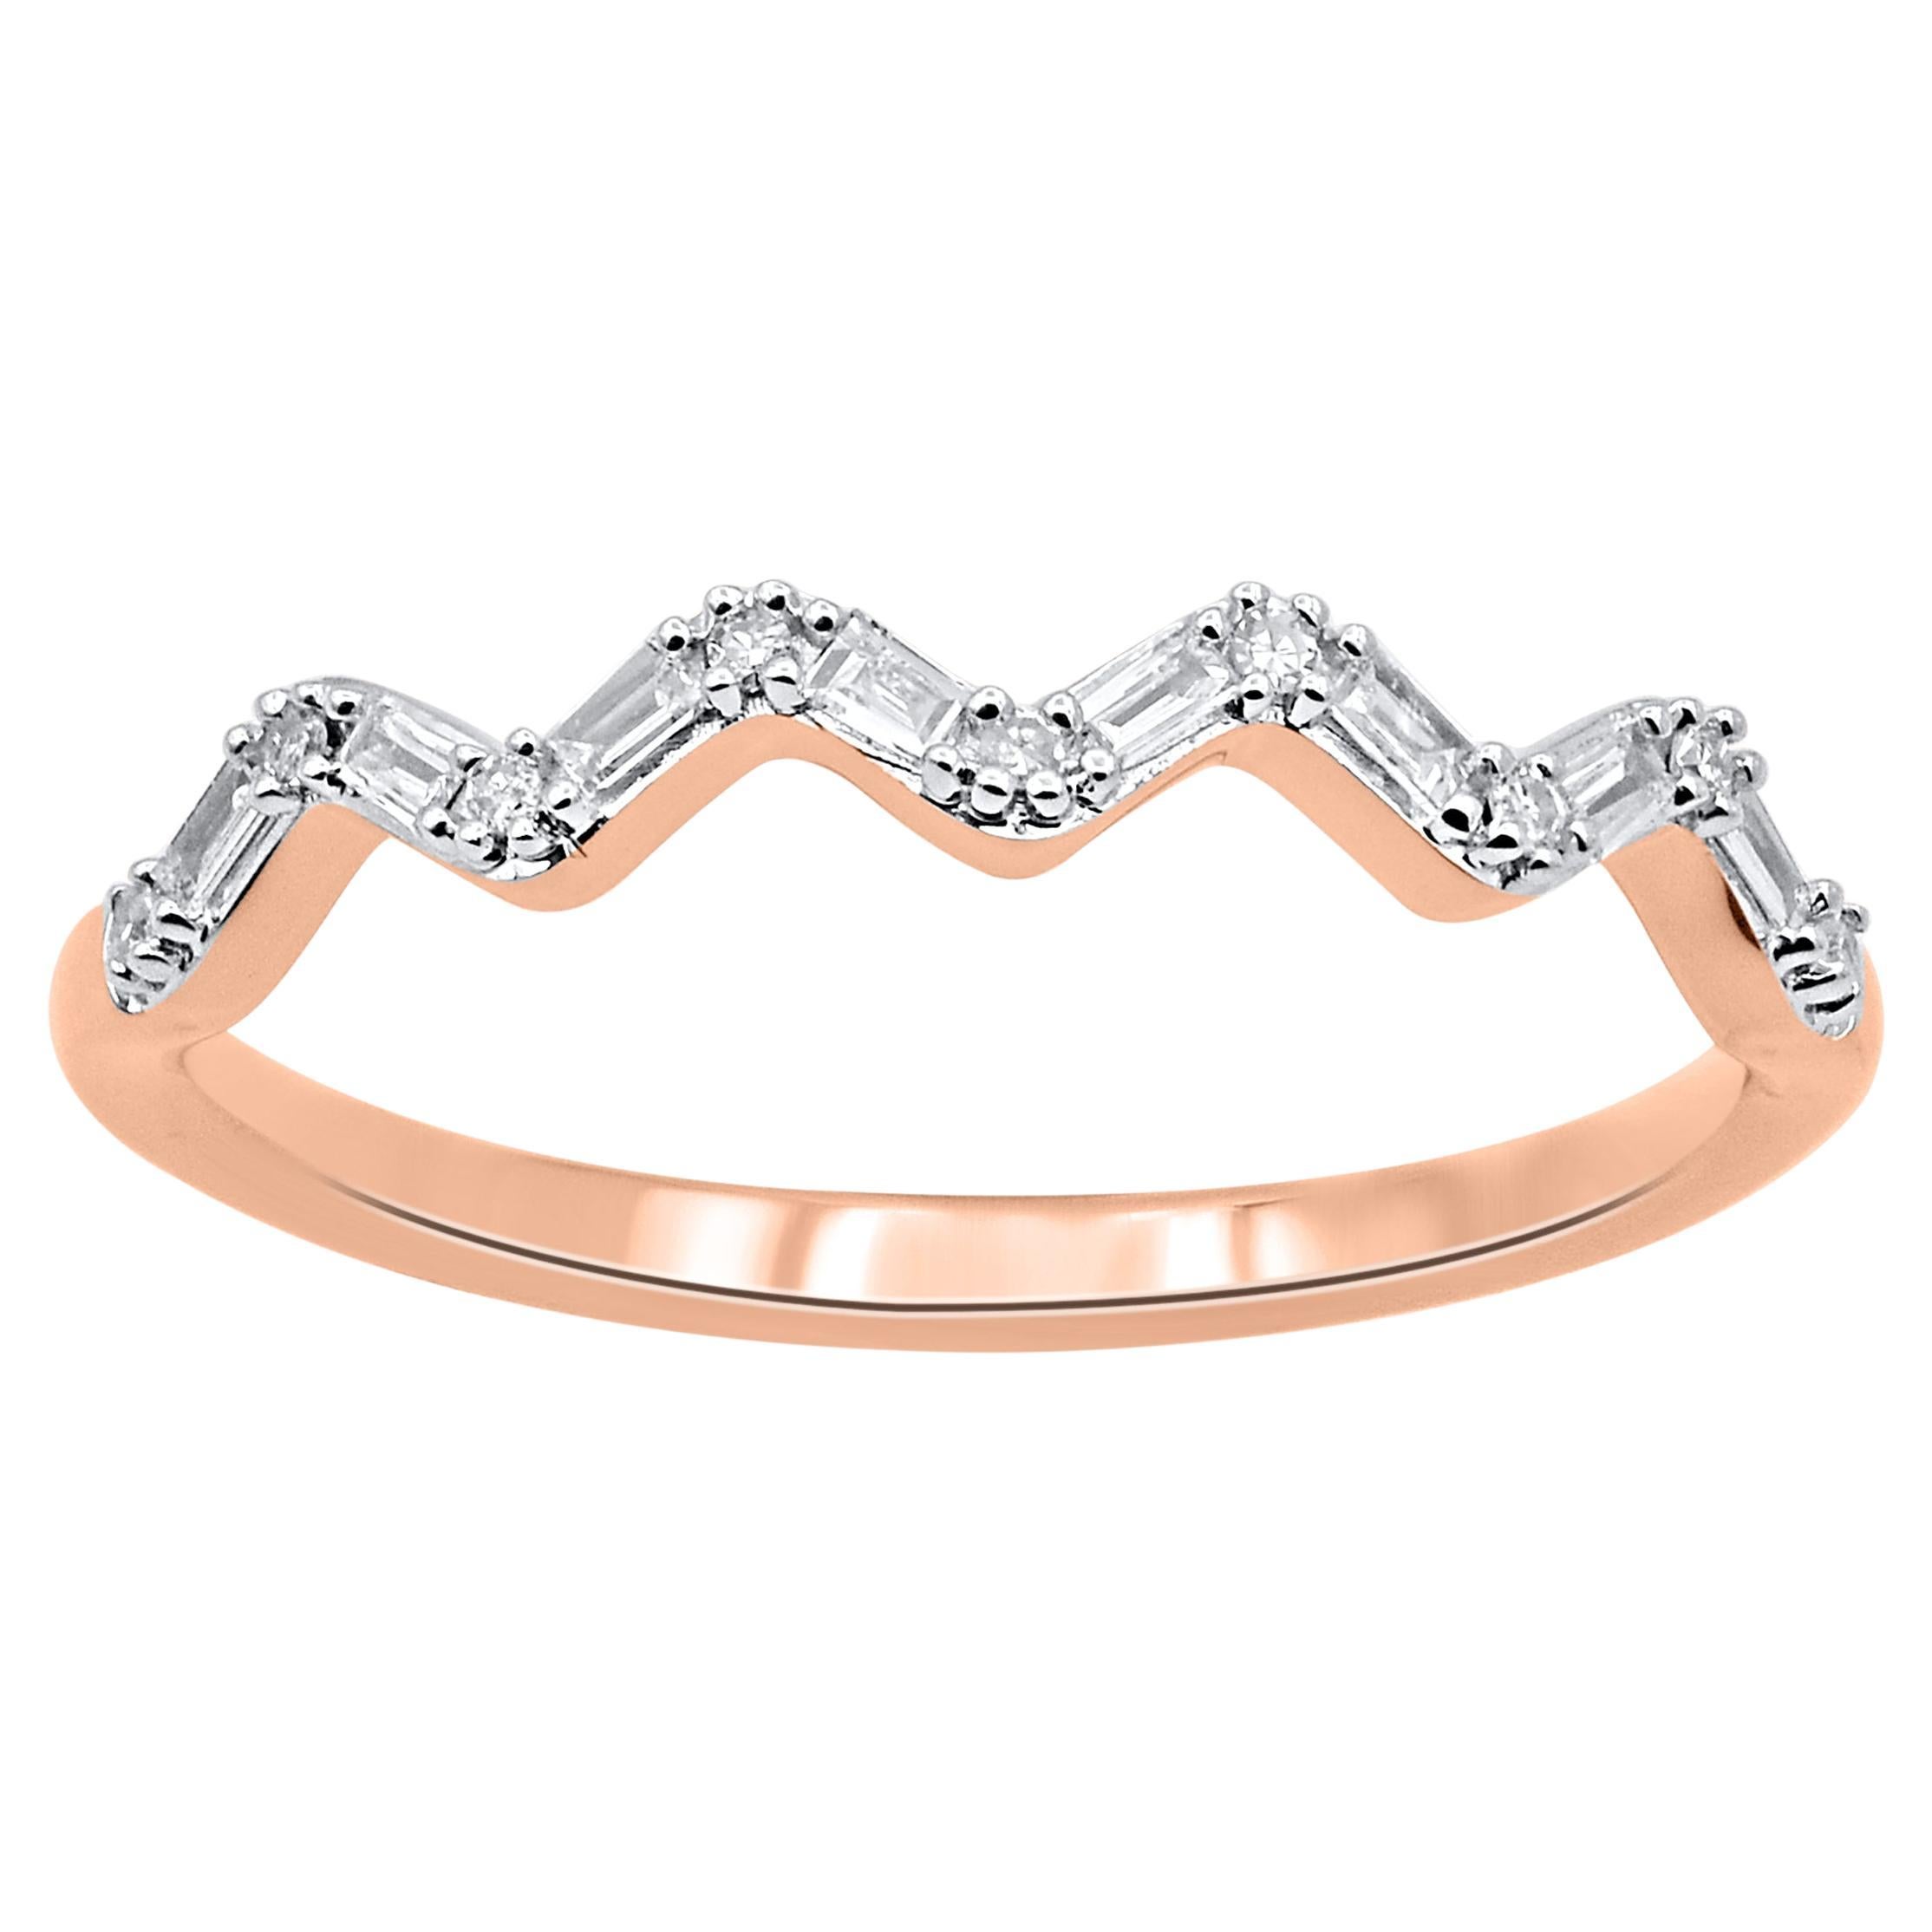 TJD 0.08 Carat Natural Diamond Wave Anniversary Band Ring in 14 Karat Rose Gold For Sale